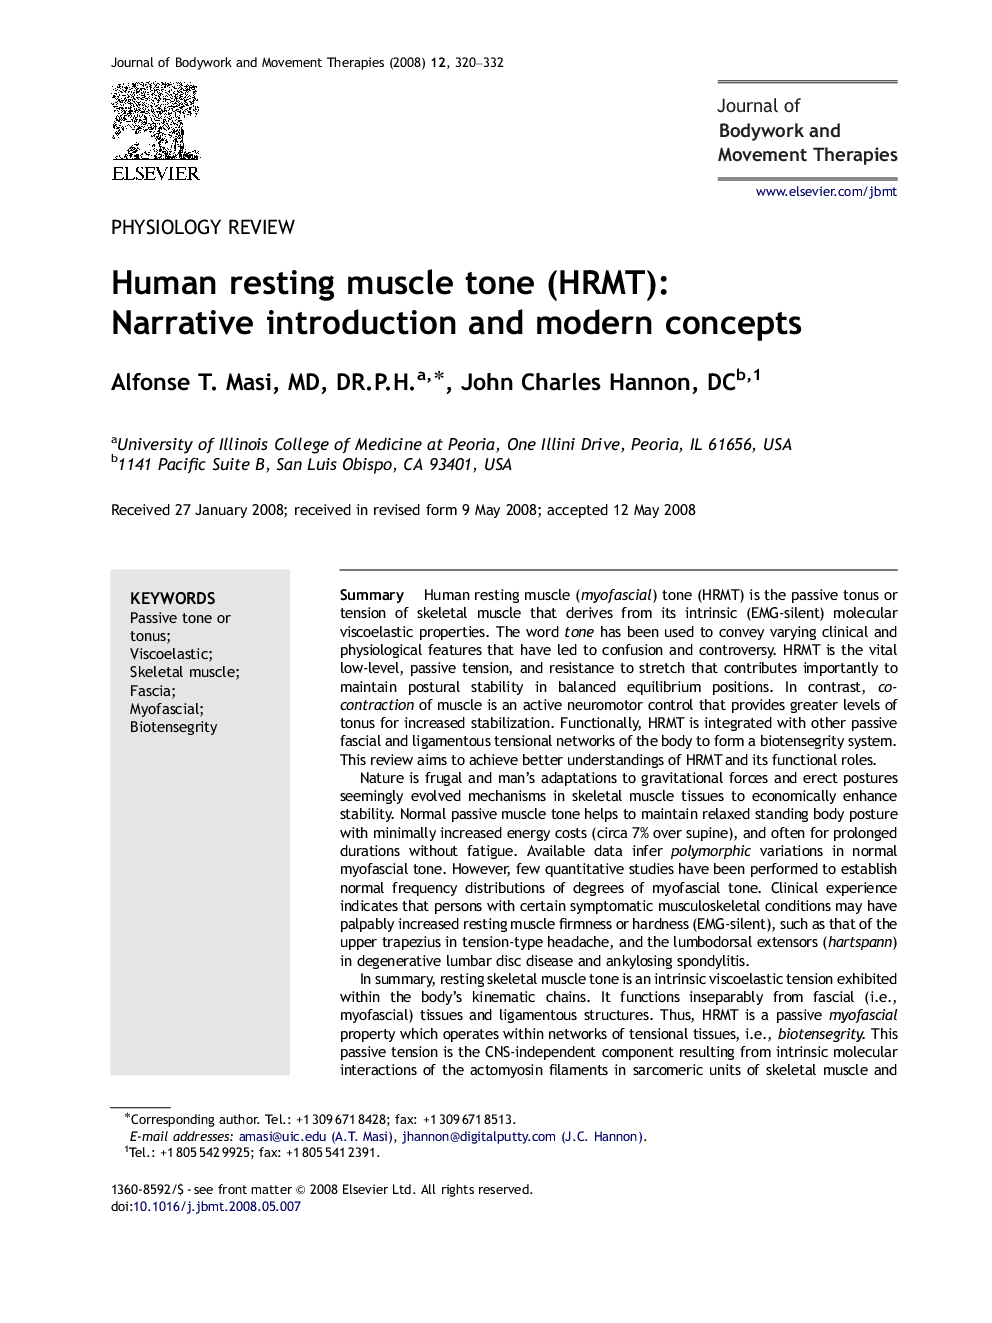 Human resting muscle tone (HRMT): Narrative introduction and modern concepts